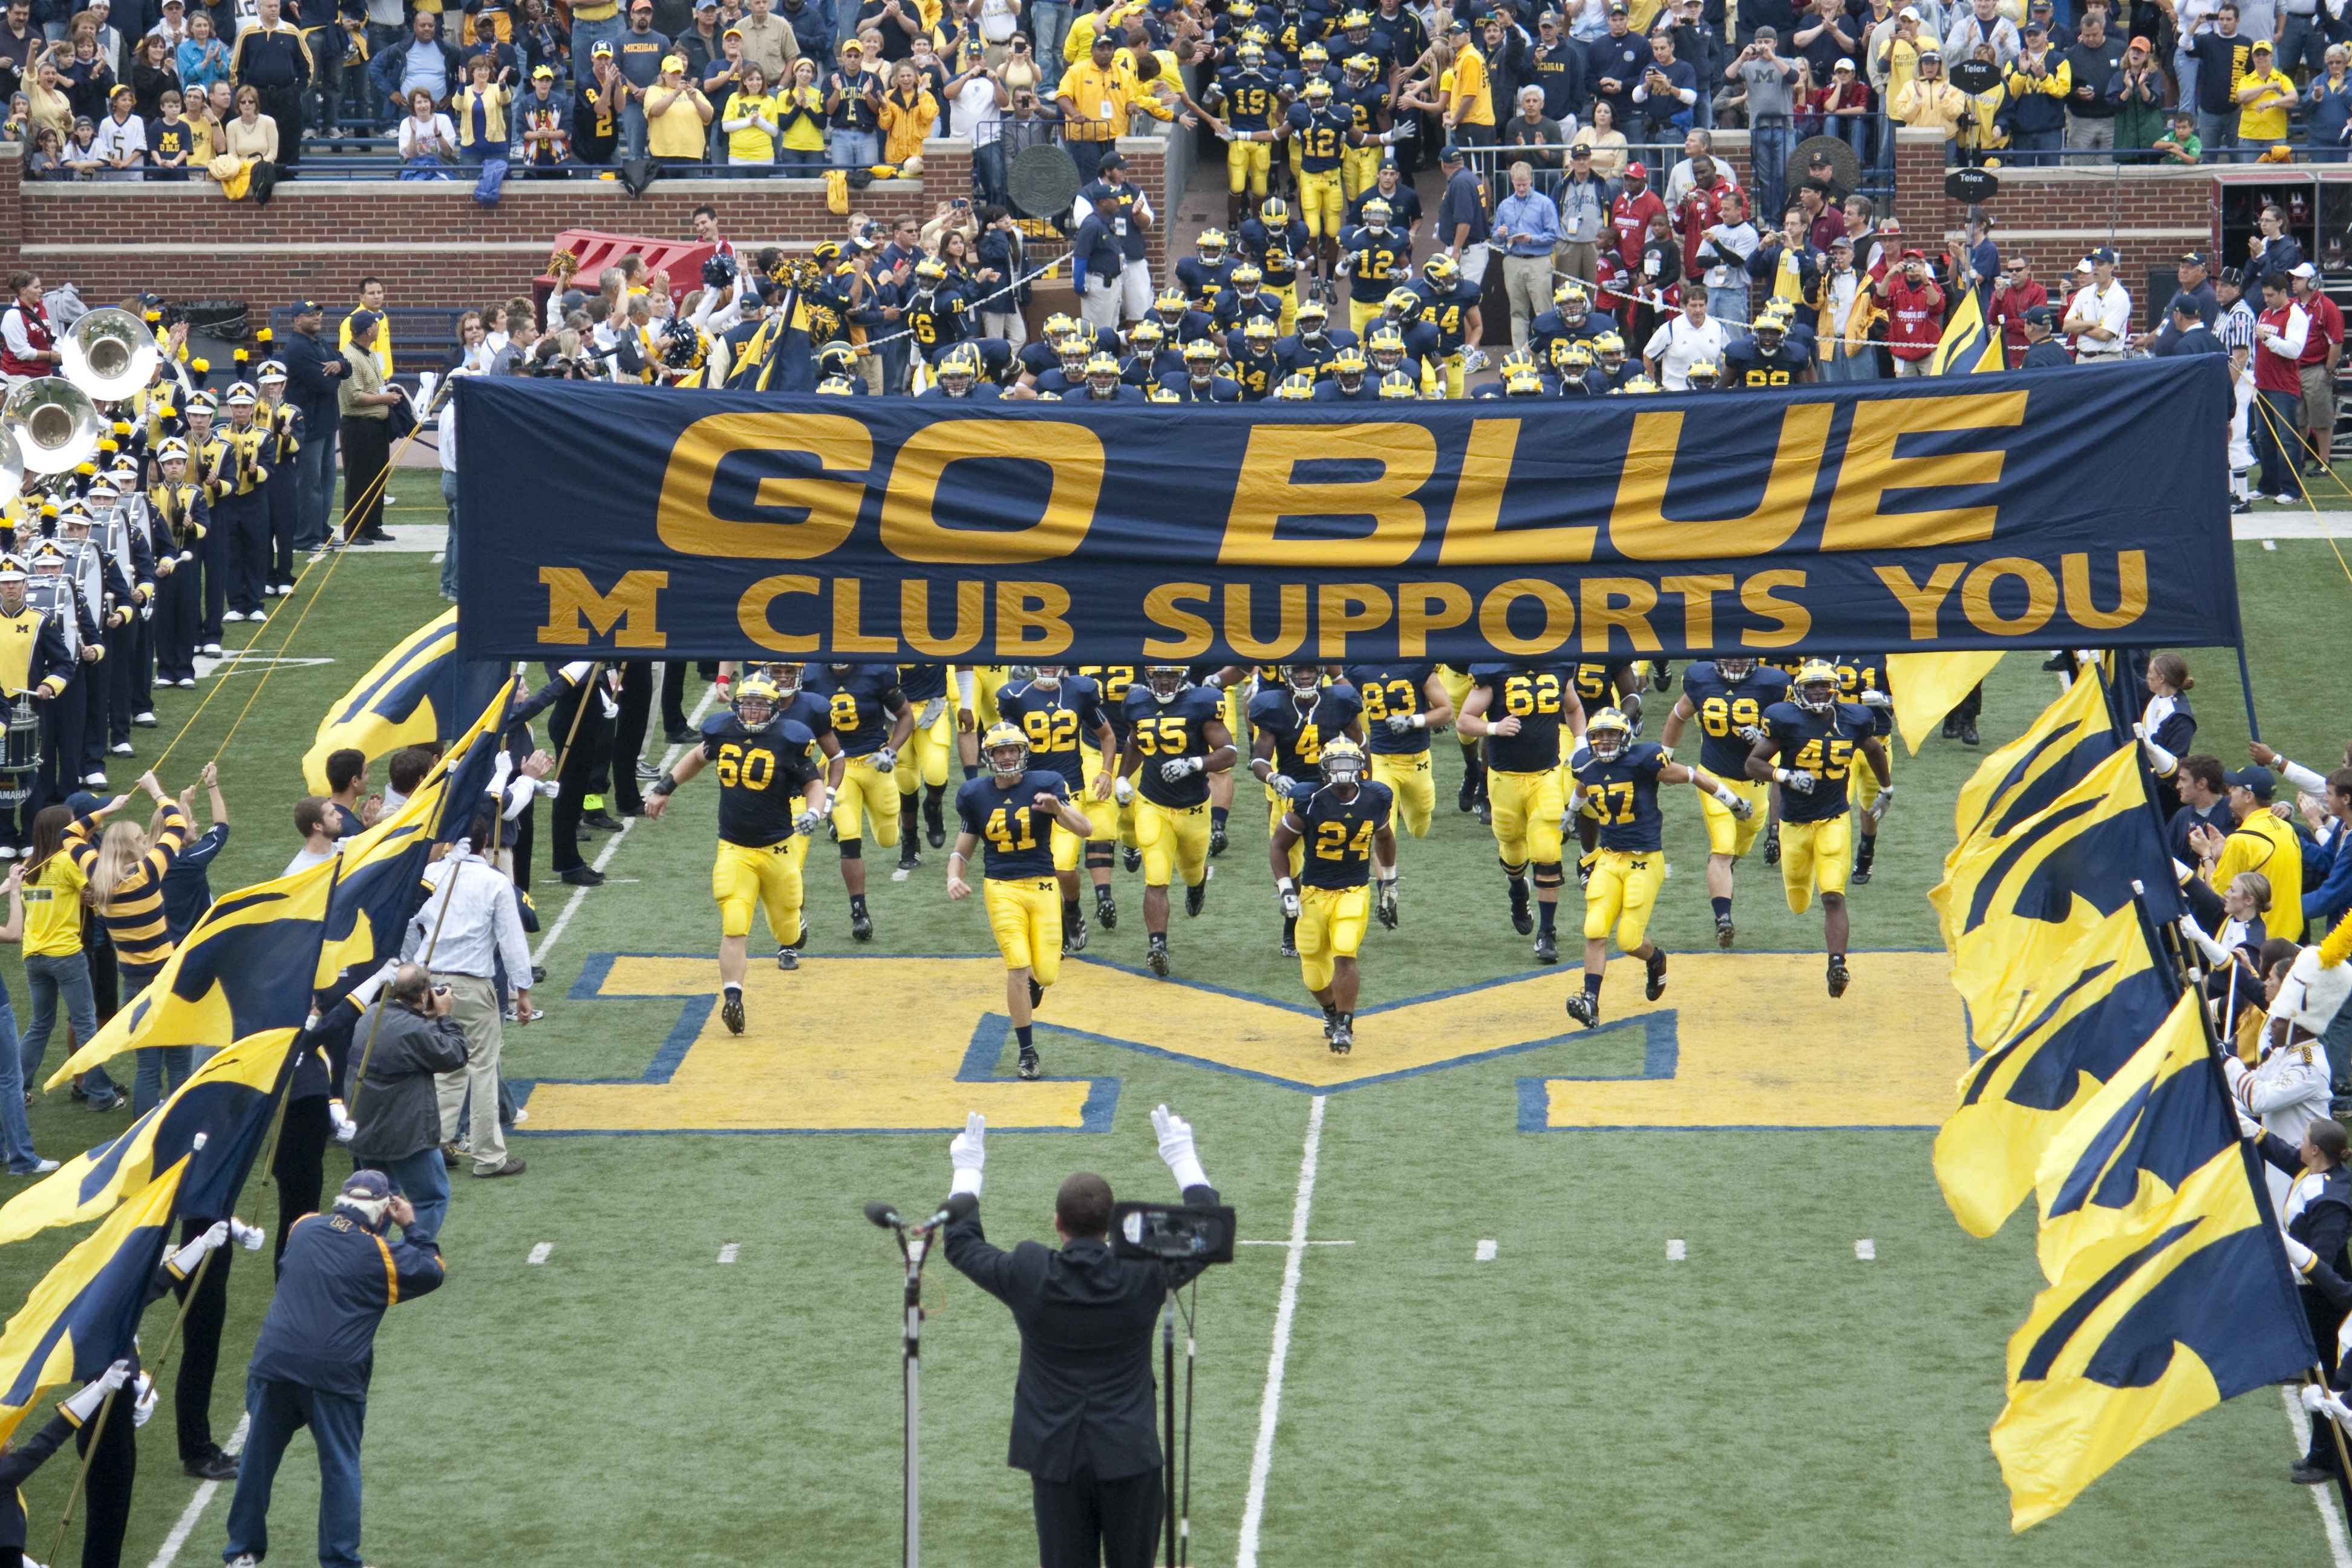 File Michigan Wolverines Football Team Enters The Field With